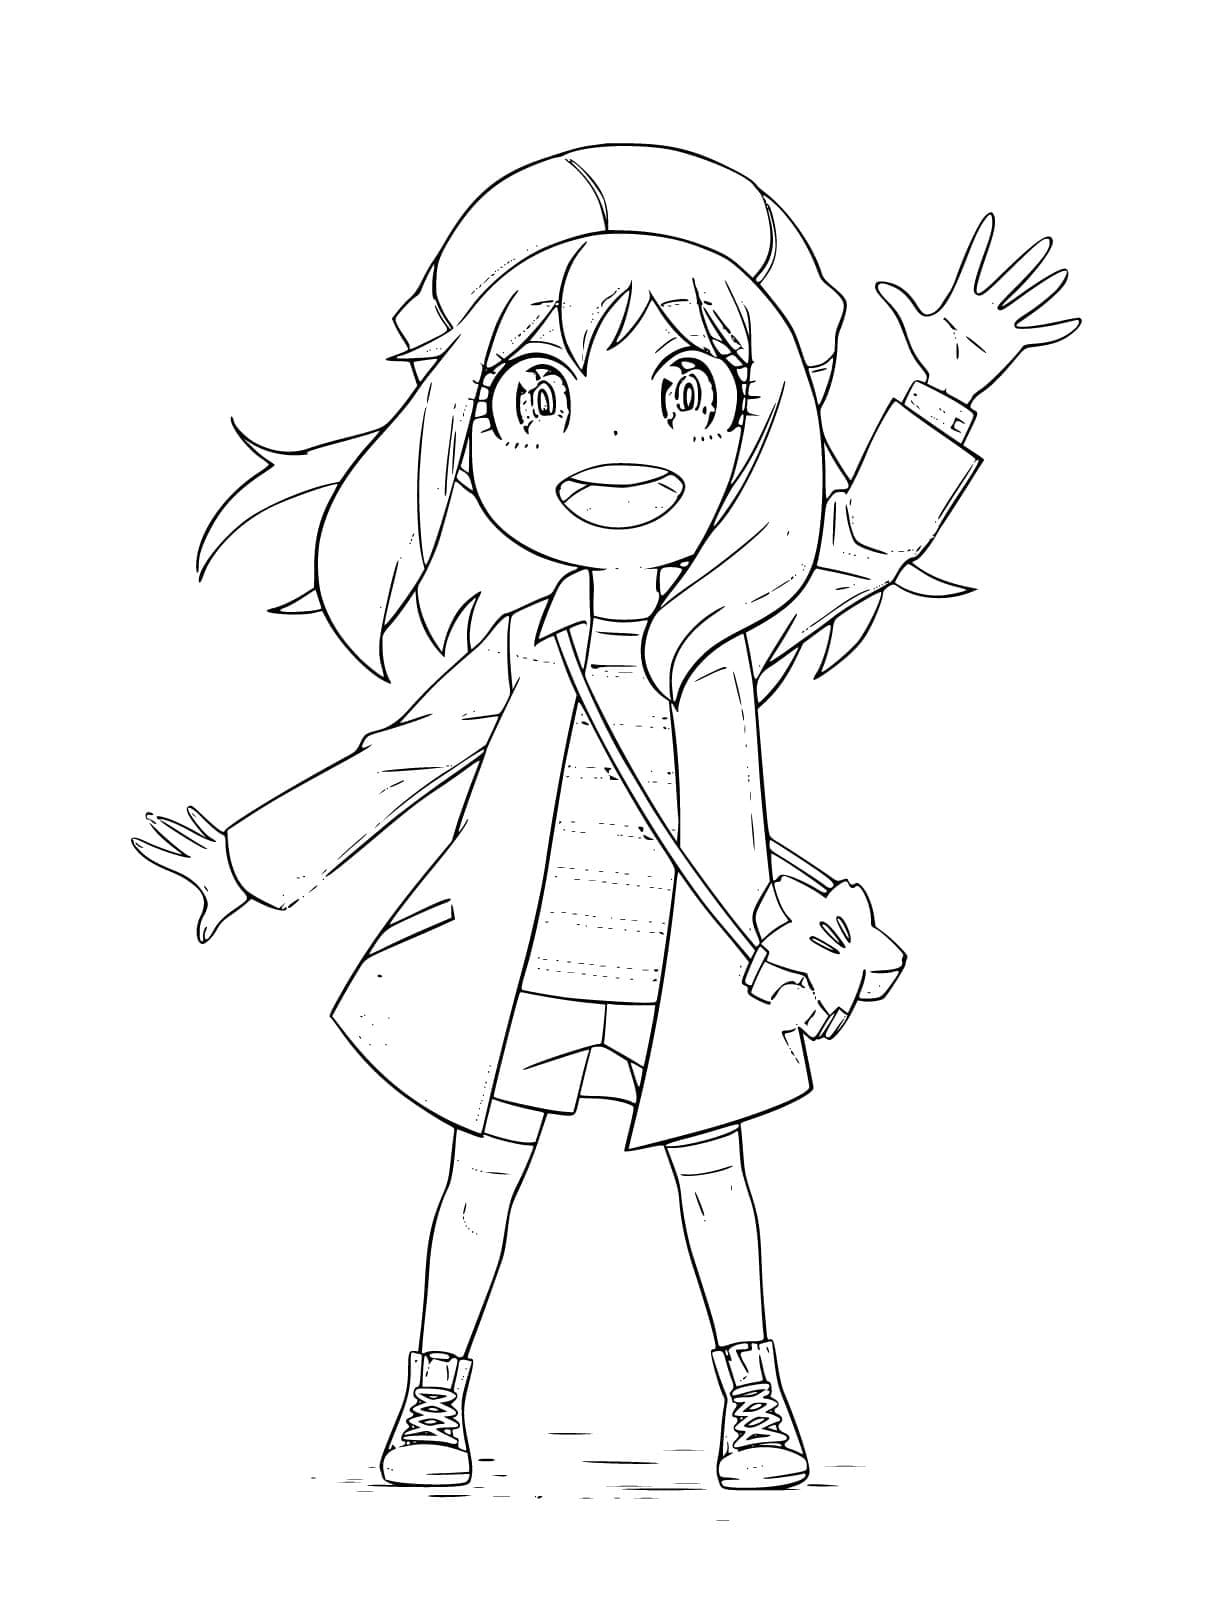 Little Anya Coloring Page - Anime Coloring Pages